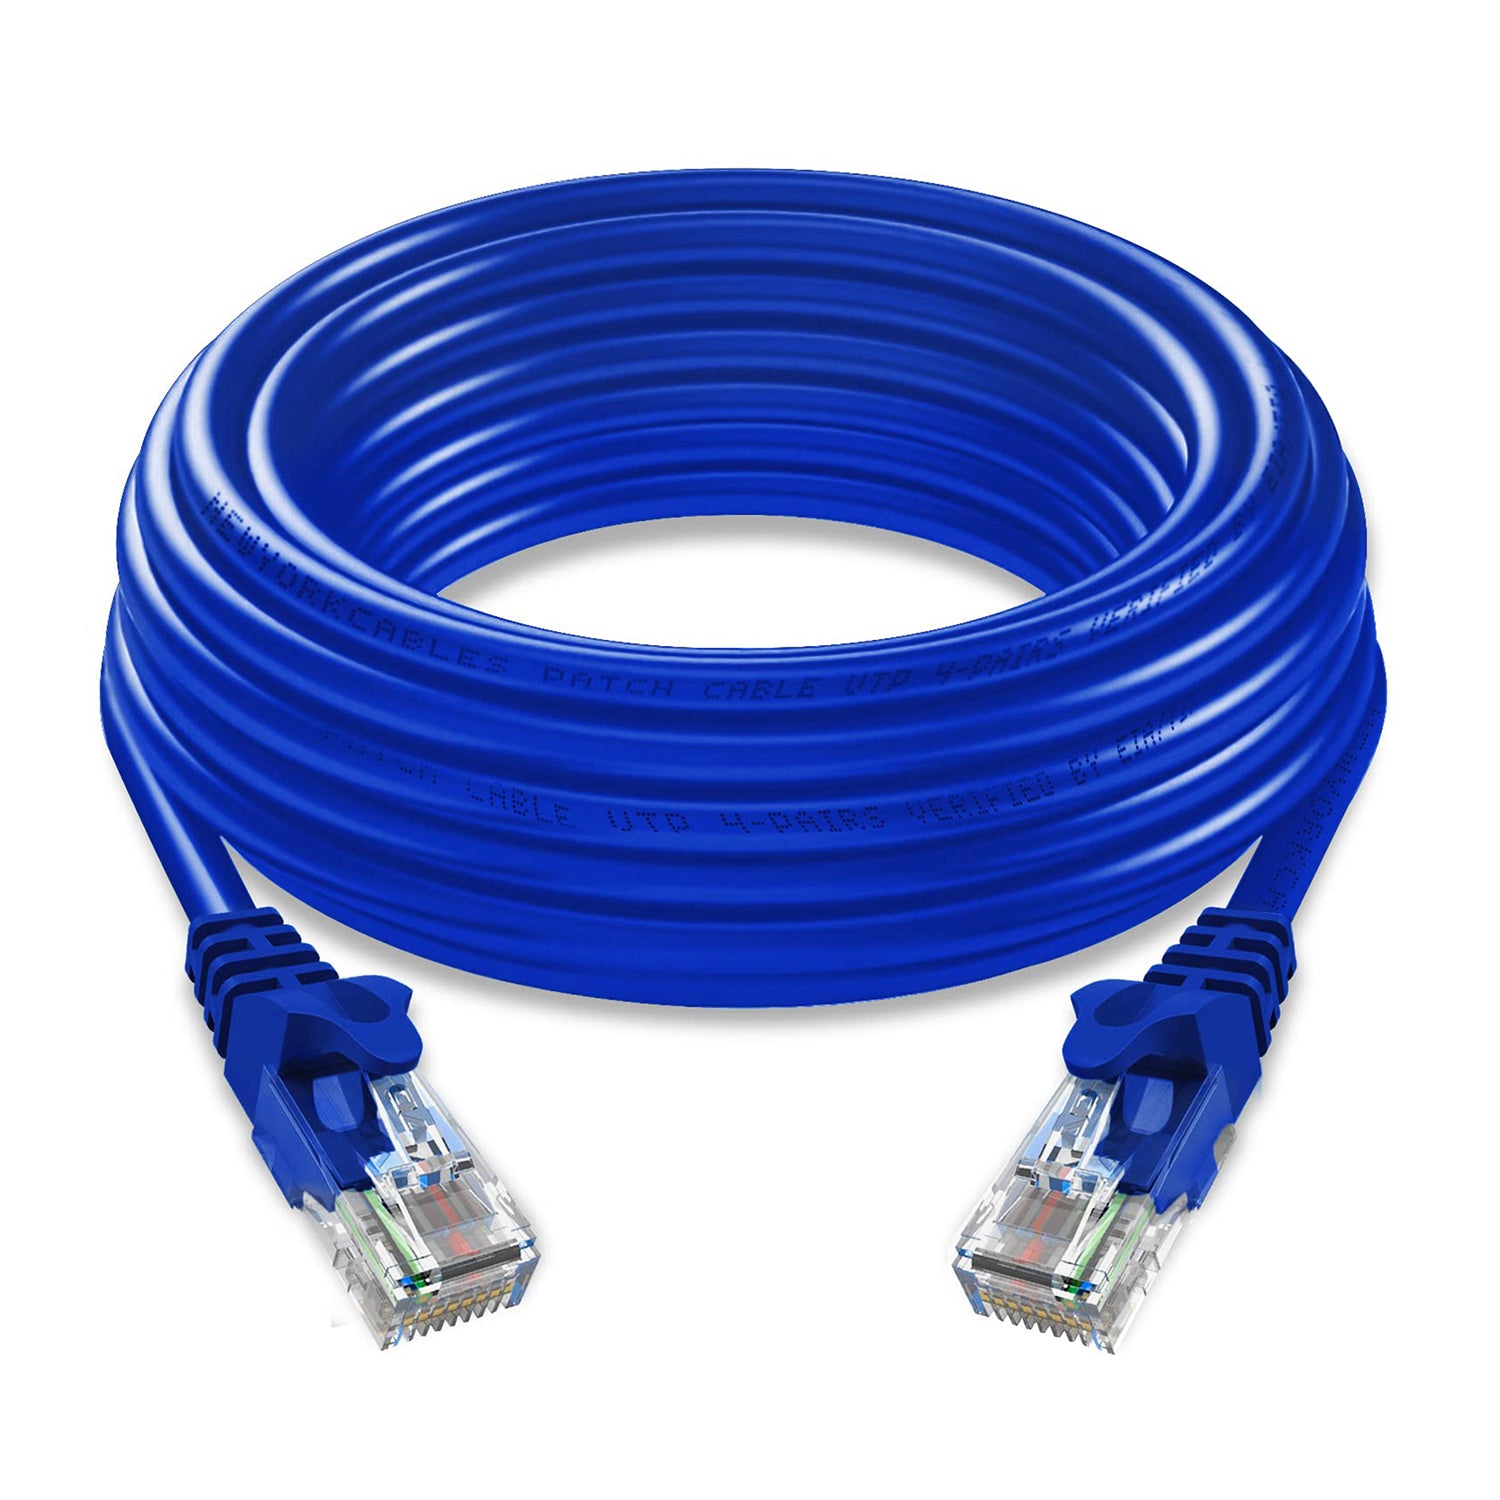 5 Core Cat 6 Ethernet Cable 1.5ft 10Gbps Network Patch Cord High Speed LAN Cable